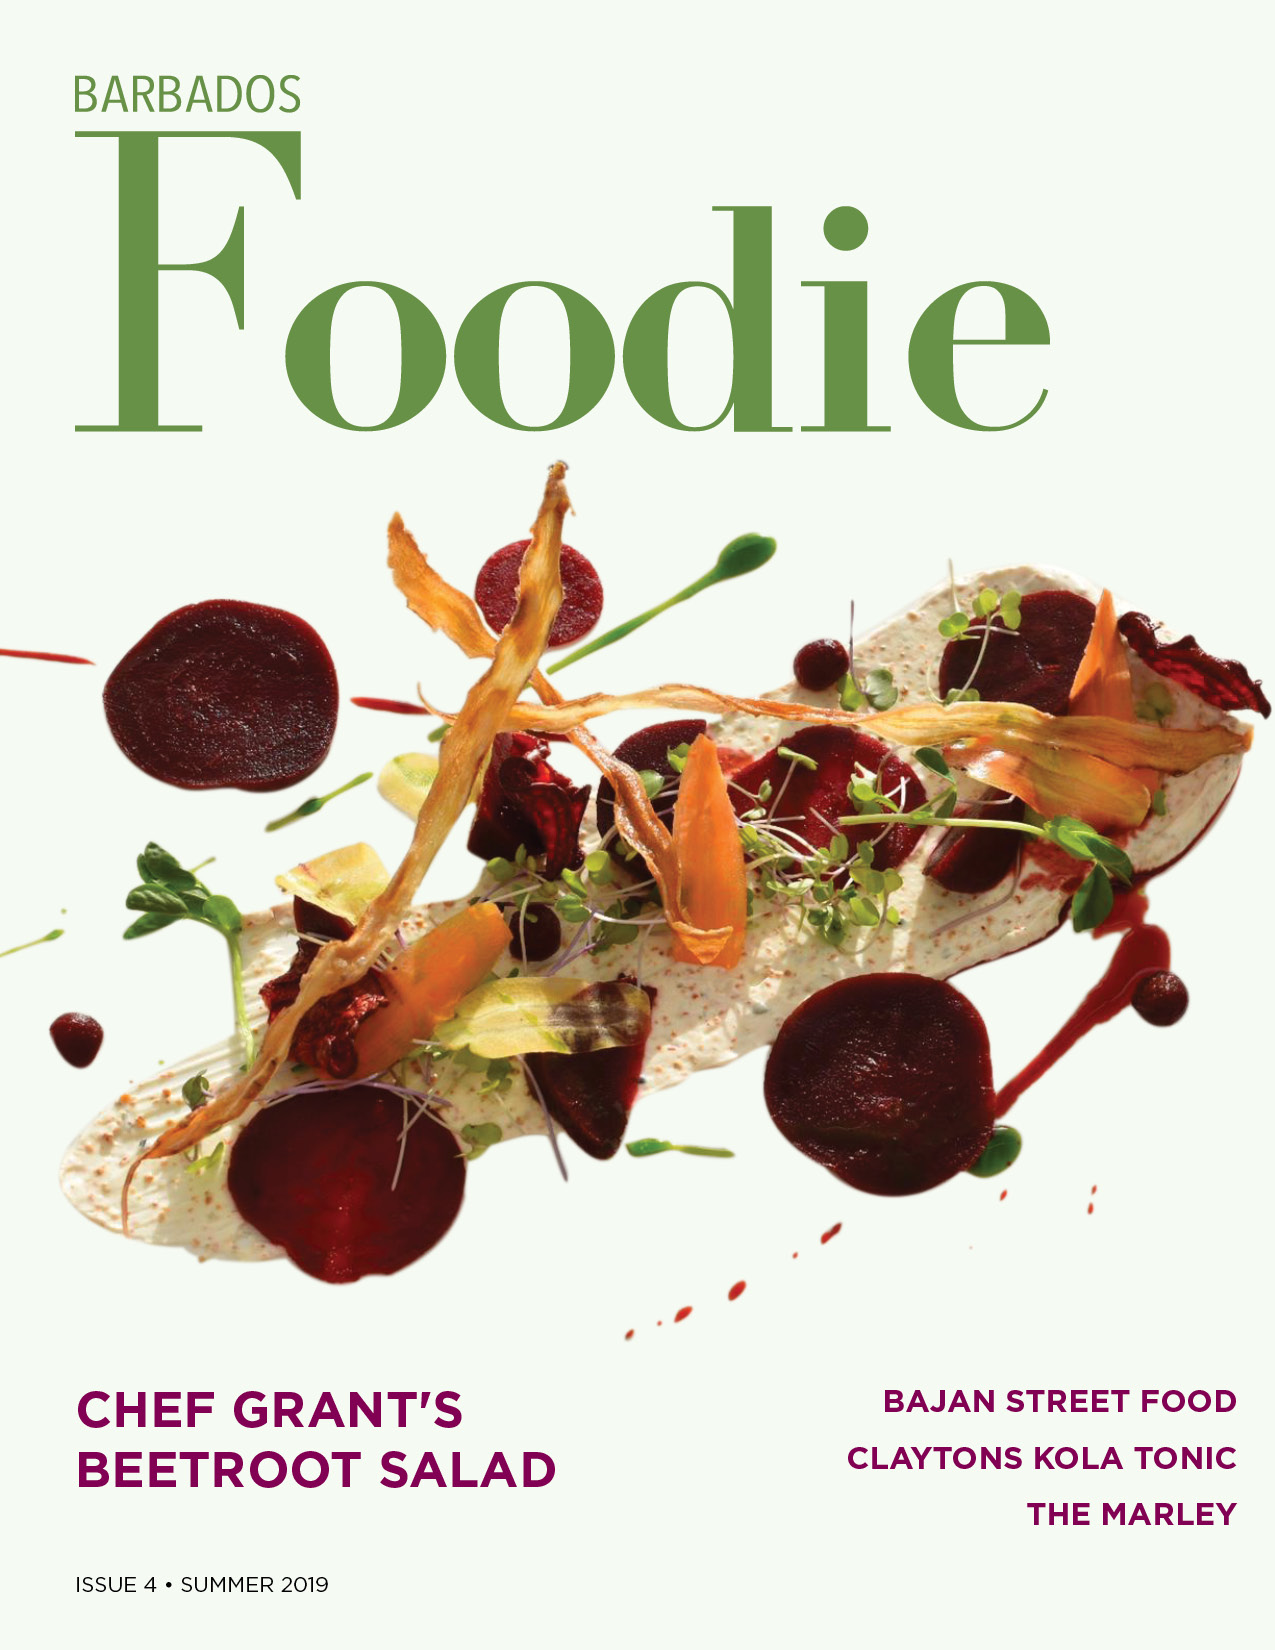 Barbados Foodie Issue 4 cover